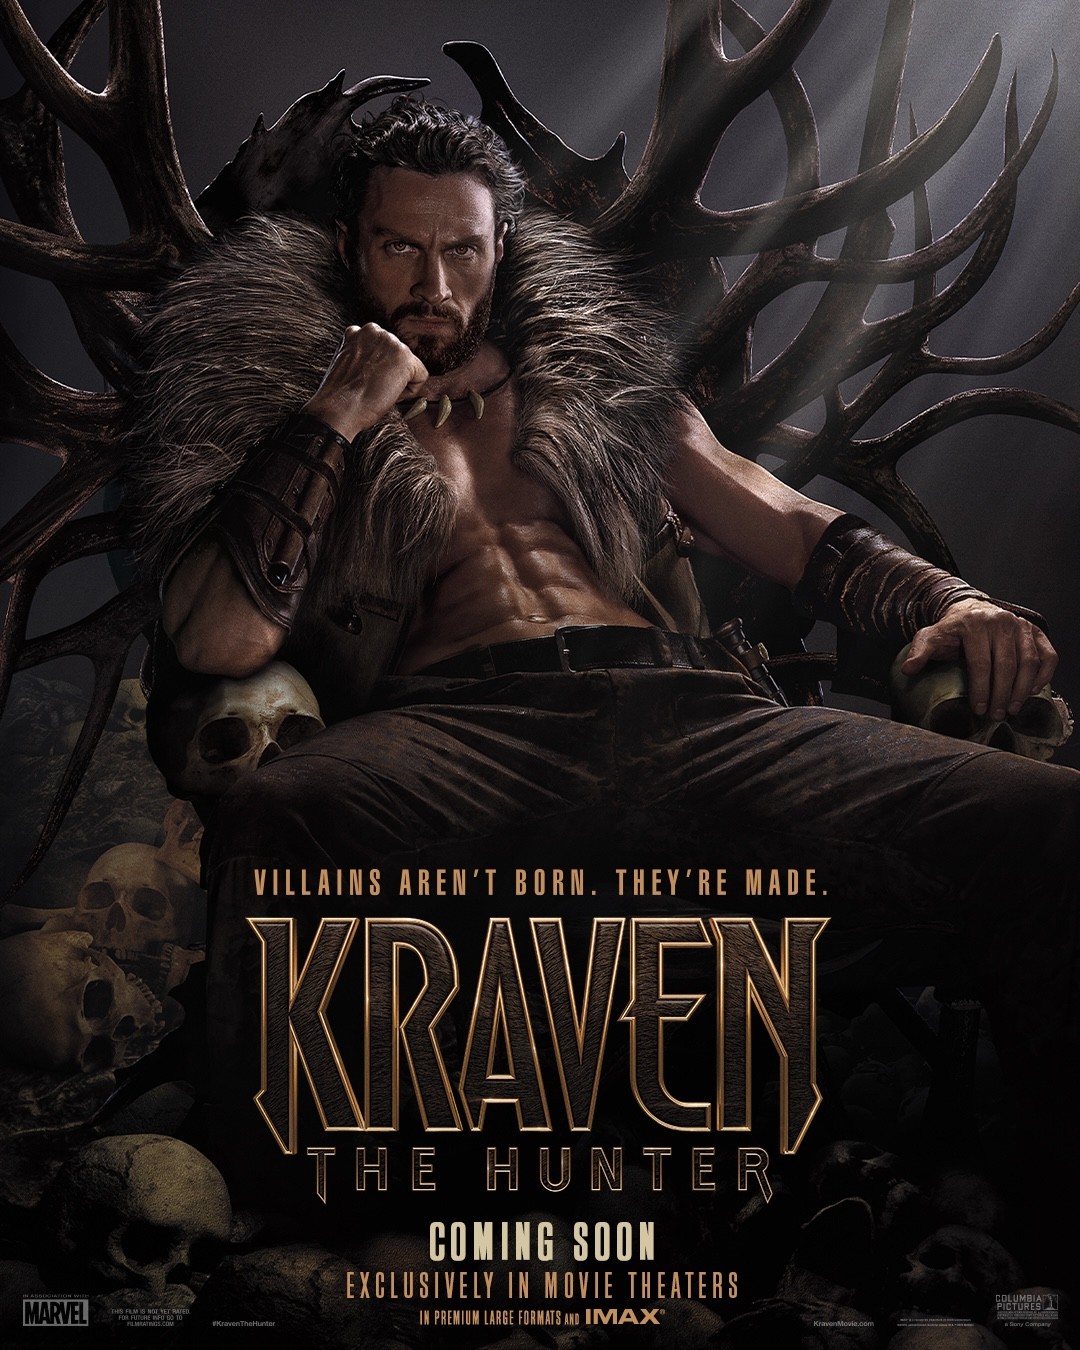 <p>You've never seen a super-hero flick quite like this. Consider this summer movie the origin story of the titular Kraven the Hunter, and discover why he becomes the feared figure we all know so well. </p><p><em>Kraven the Hunter premieres August 30, and stars Aaron Taylor-Johnson, Ariana DeBose, Fred Hechinger, Alessandro Nivola, Christopher Abbott, and Russell Crowe.</em></p><p>Like Brit + Co's content? <a href="https://www.msn.com/en-us/channel/source/BRITCO/sr-vid-mwh45mxjpbgutp55qr3ca3bnmhxae80xpqj0vw80yesb5g0h5q2a?cvid=6efac0aec71d460989f862c7f33ea985&ei=106">Be sure to follow us for more! </a> </p>